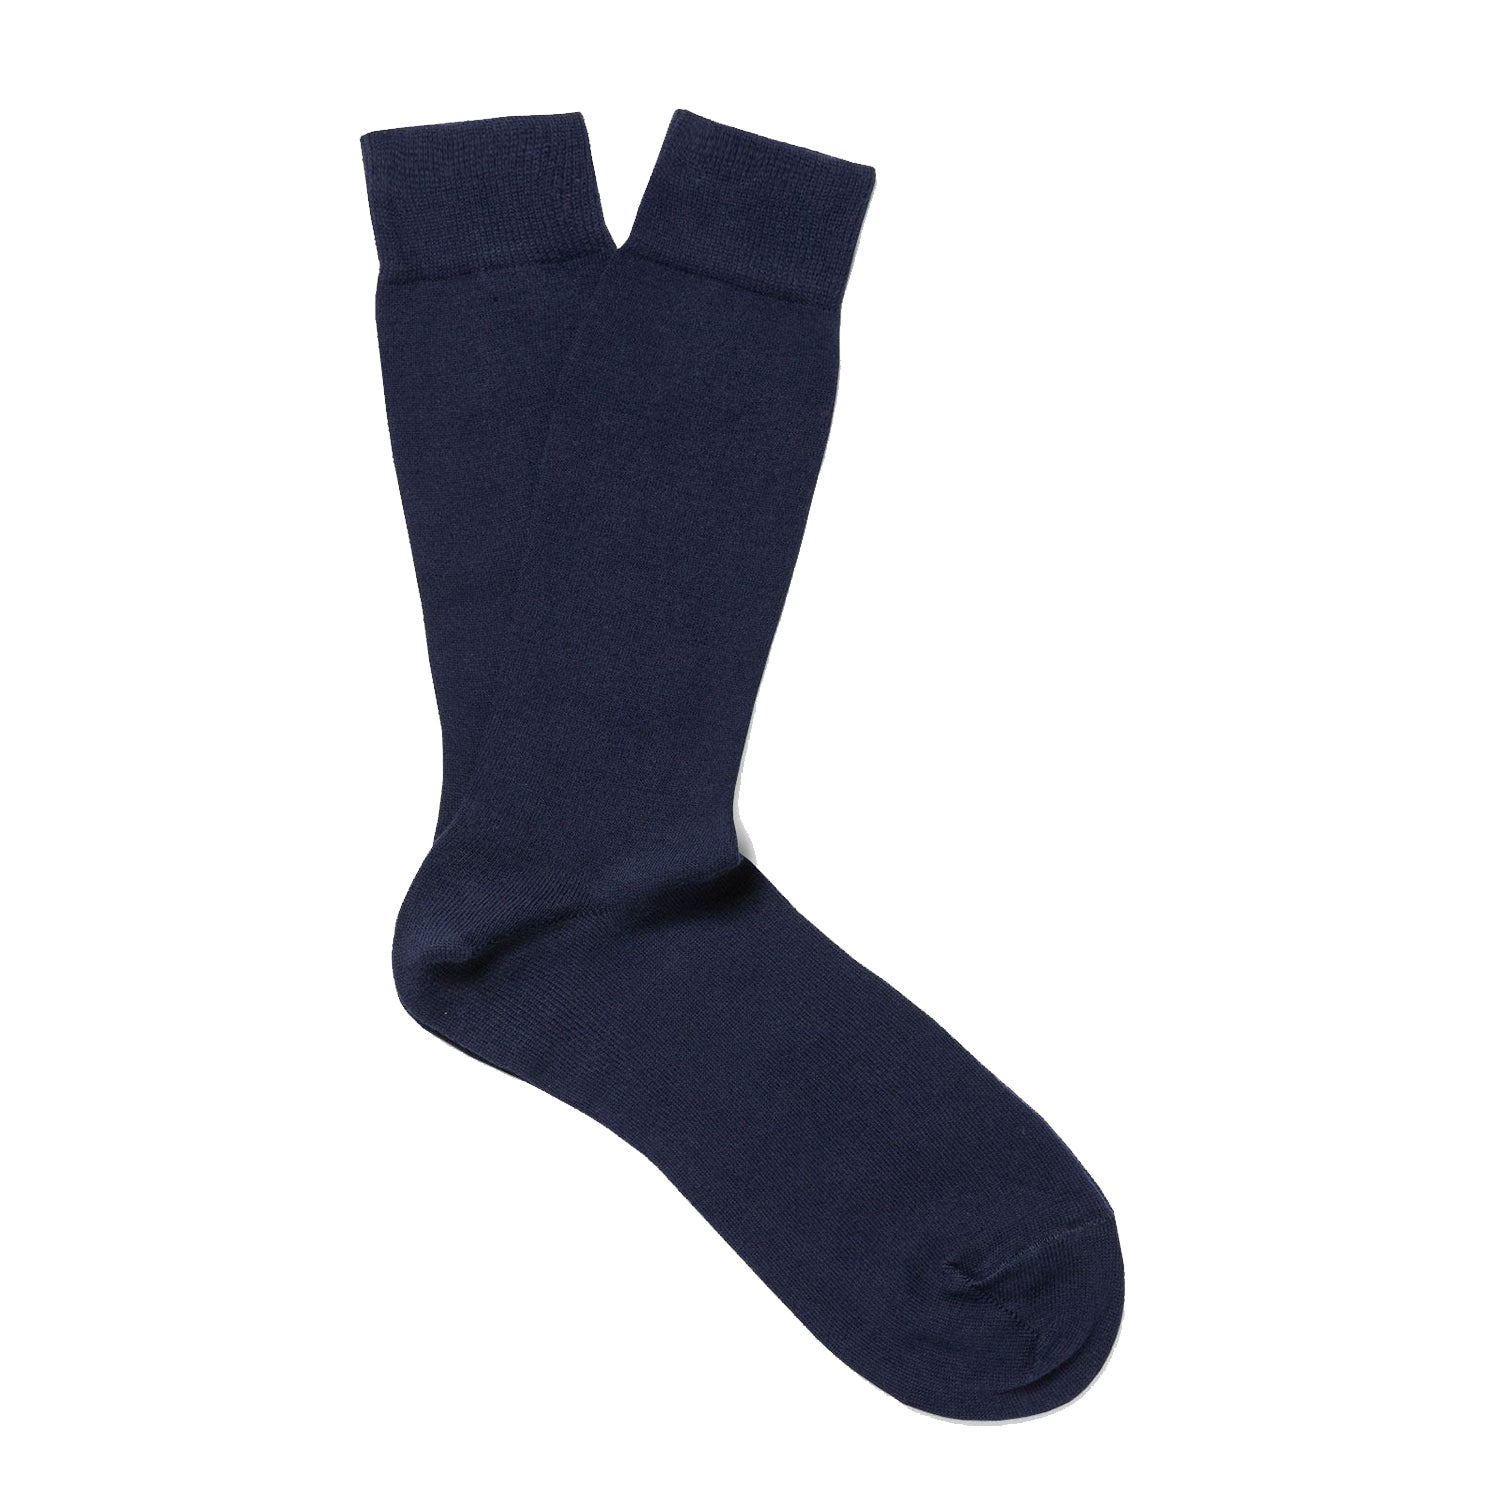 Cotton Sock NAVY
Made in Portugal SUNSPEL